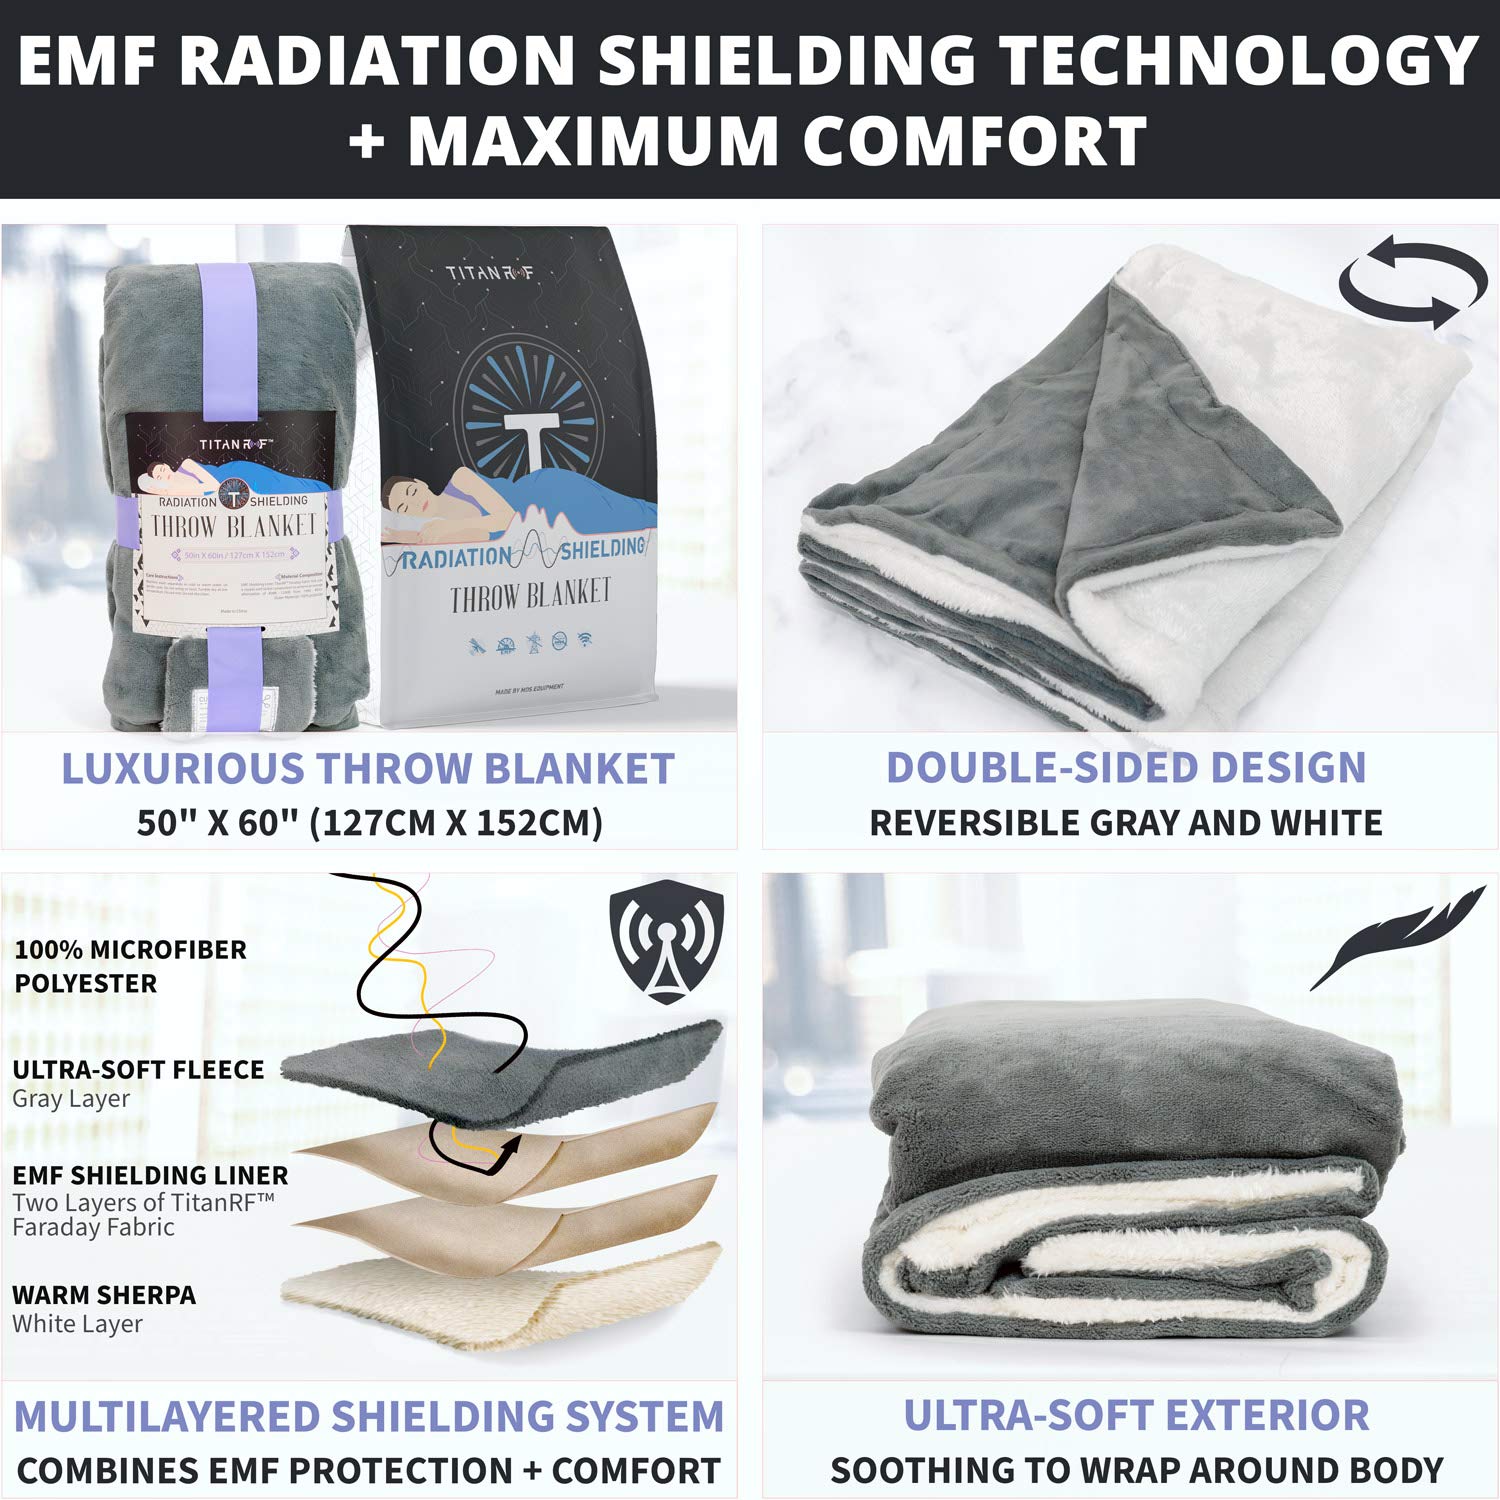 Mission Darkness TitanRF Radiation Shielding Throw Blanket - 50" x 60" (127cm x 152cm) Ultra-Soft Reversible Gray and White Design with EMF Radiation Protection - This is Not a Faraday Cage